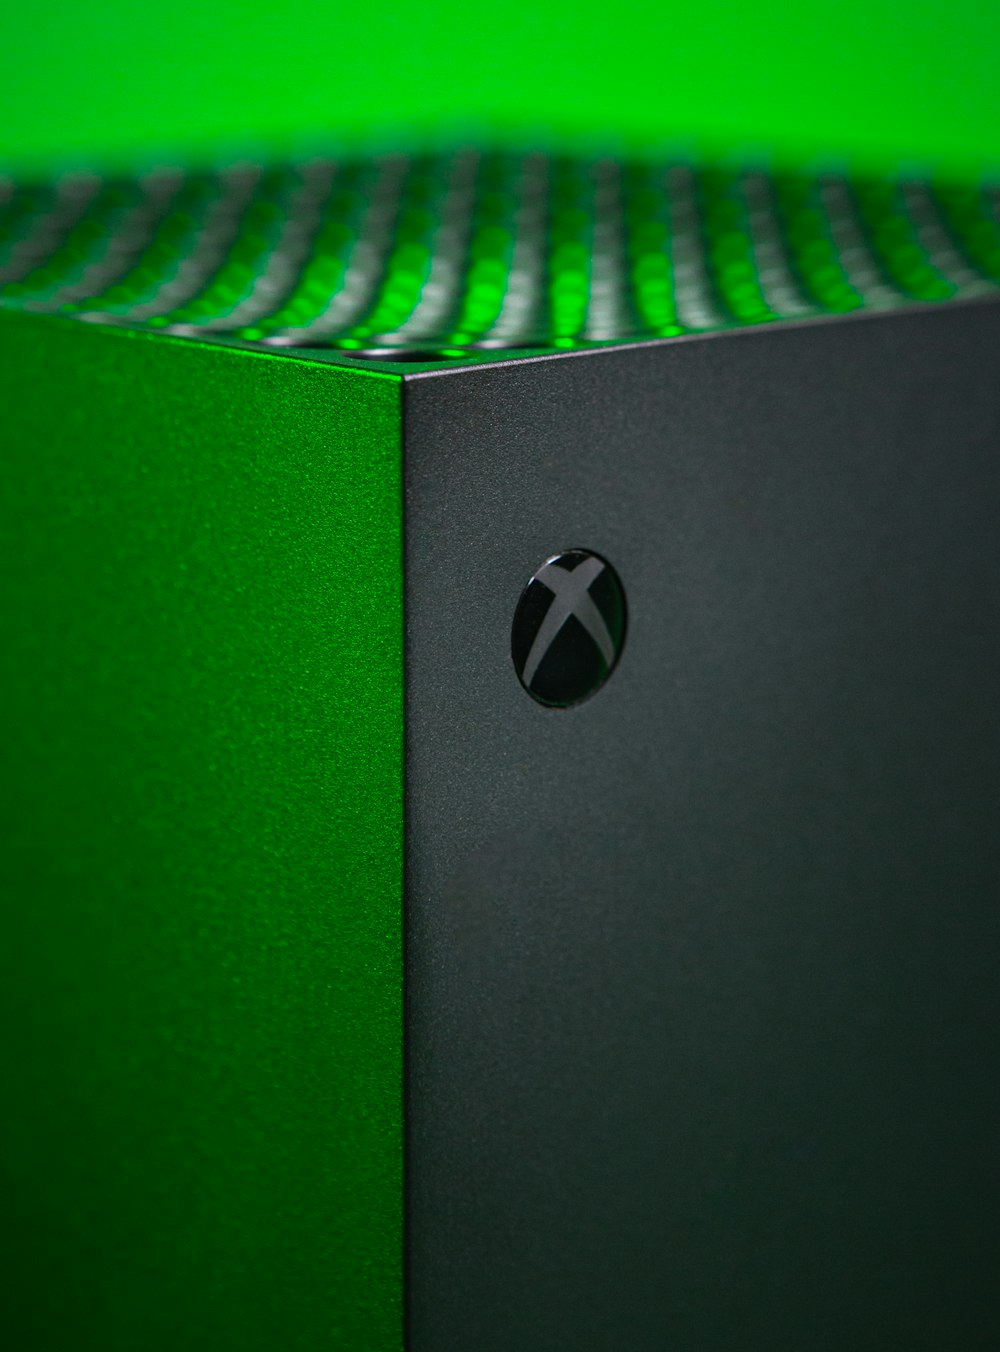 Xbox Series X Pictures | Download Free Images on Unsplash